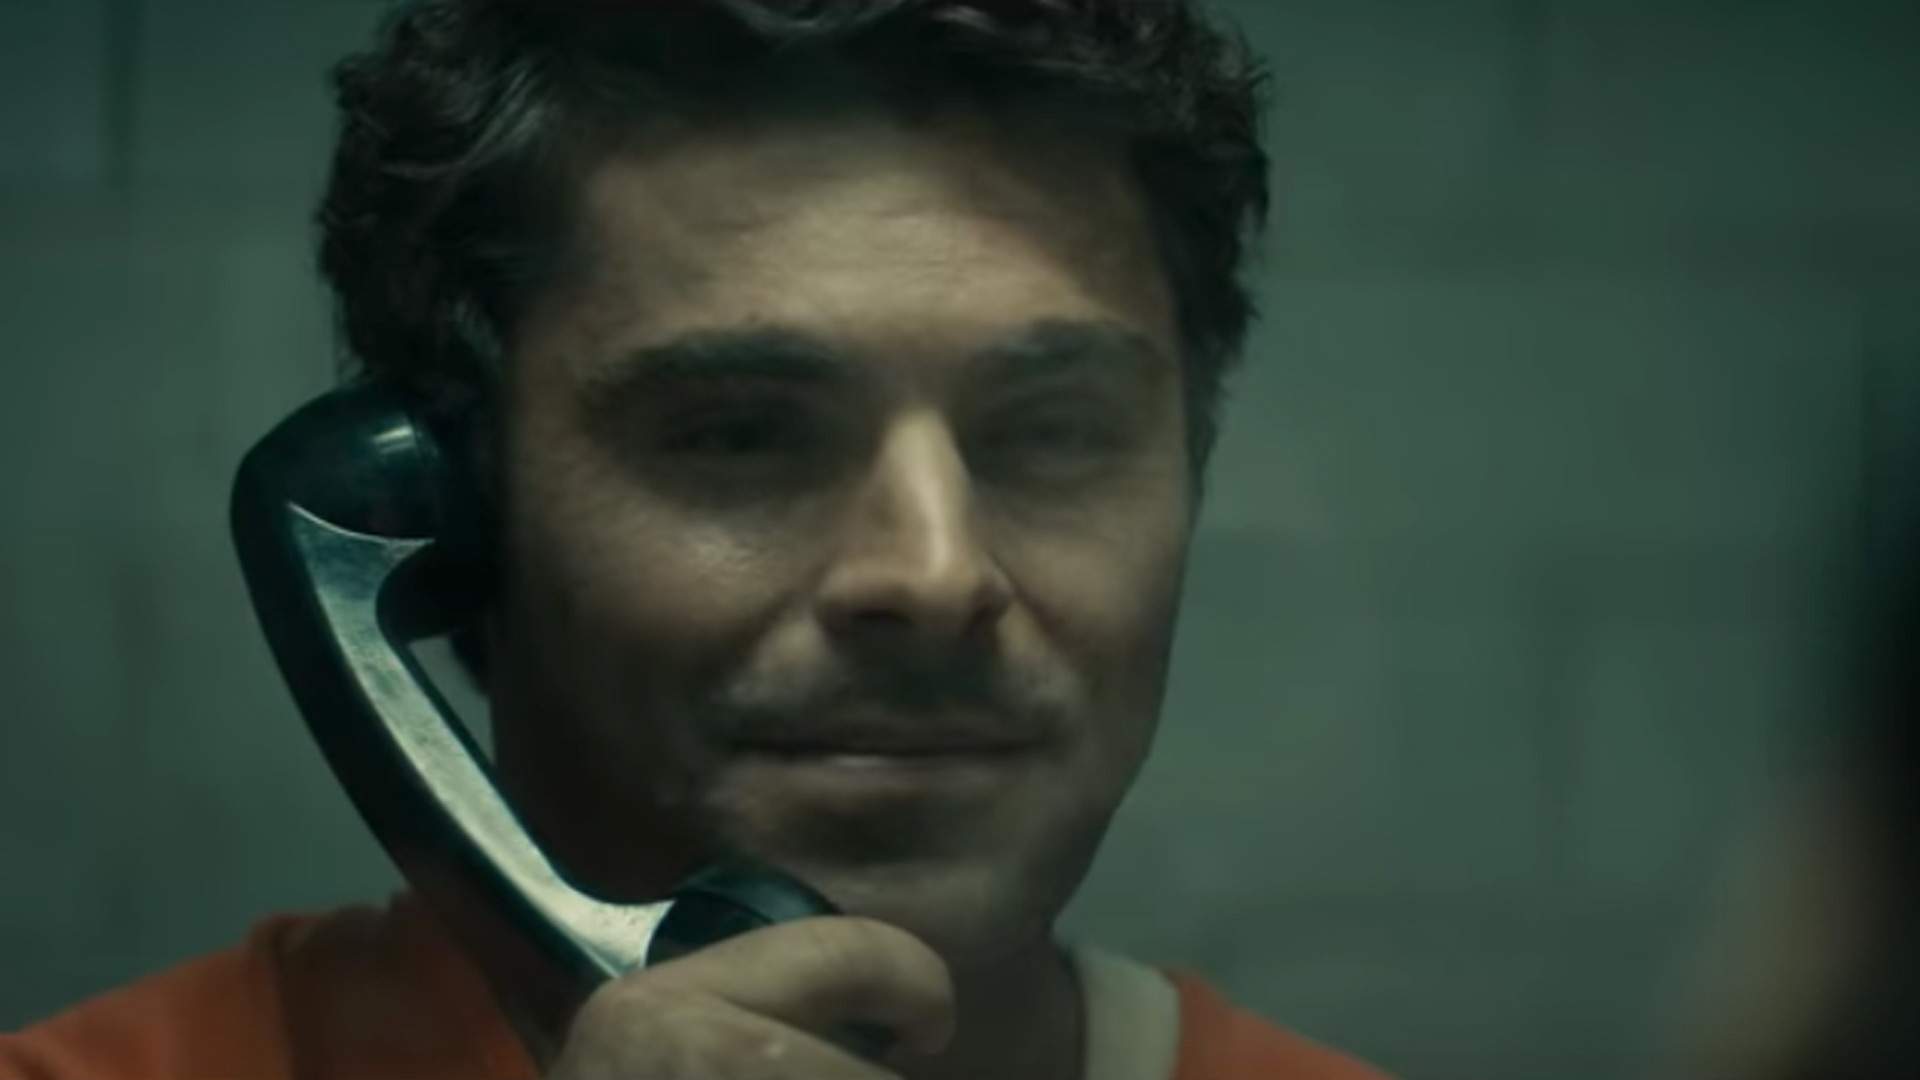 A Chilling New Trailer Has Dropped for the Zac Efron-Starring Ted Bundy Film